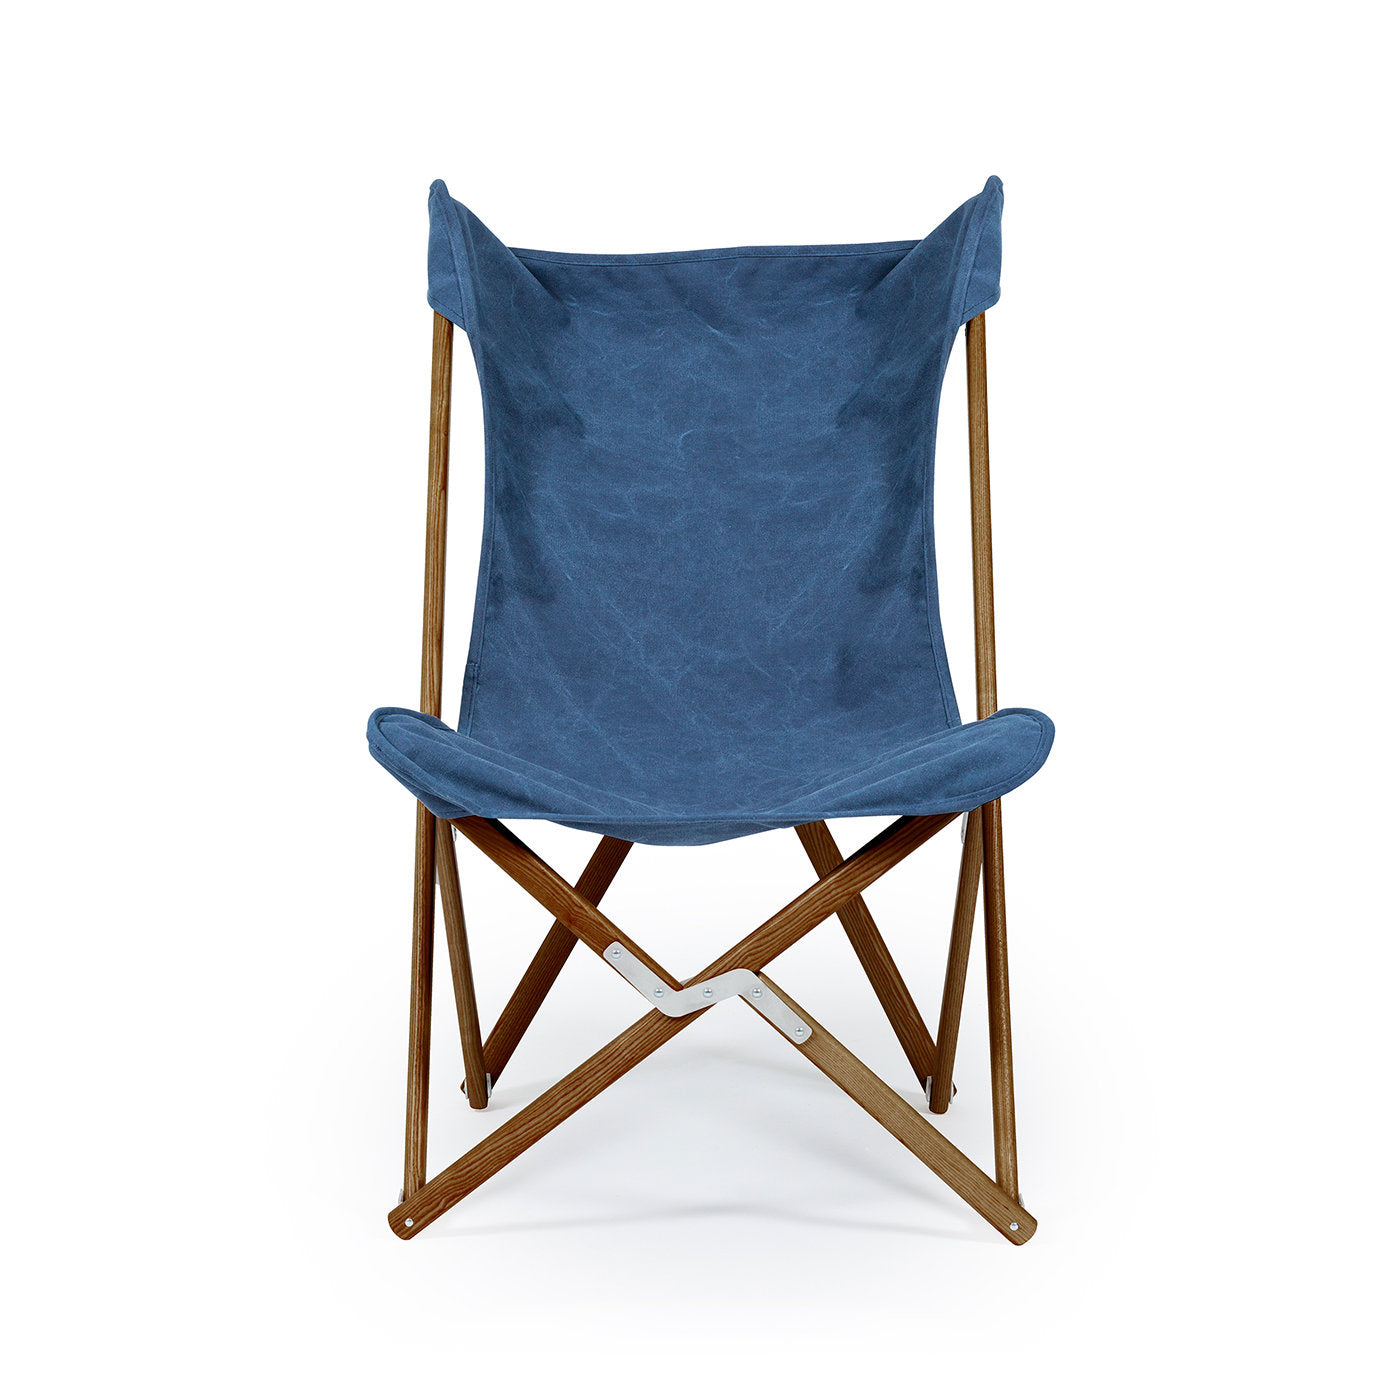 Tripolina Armchair in Blue Jeans - Alternative view 1